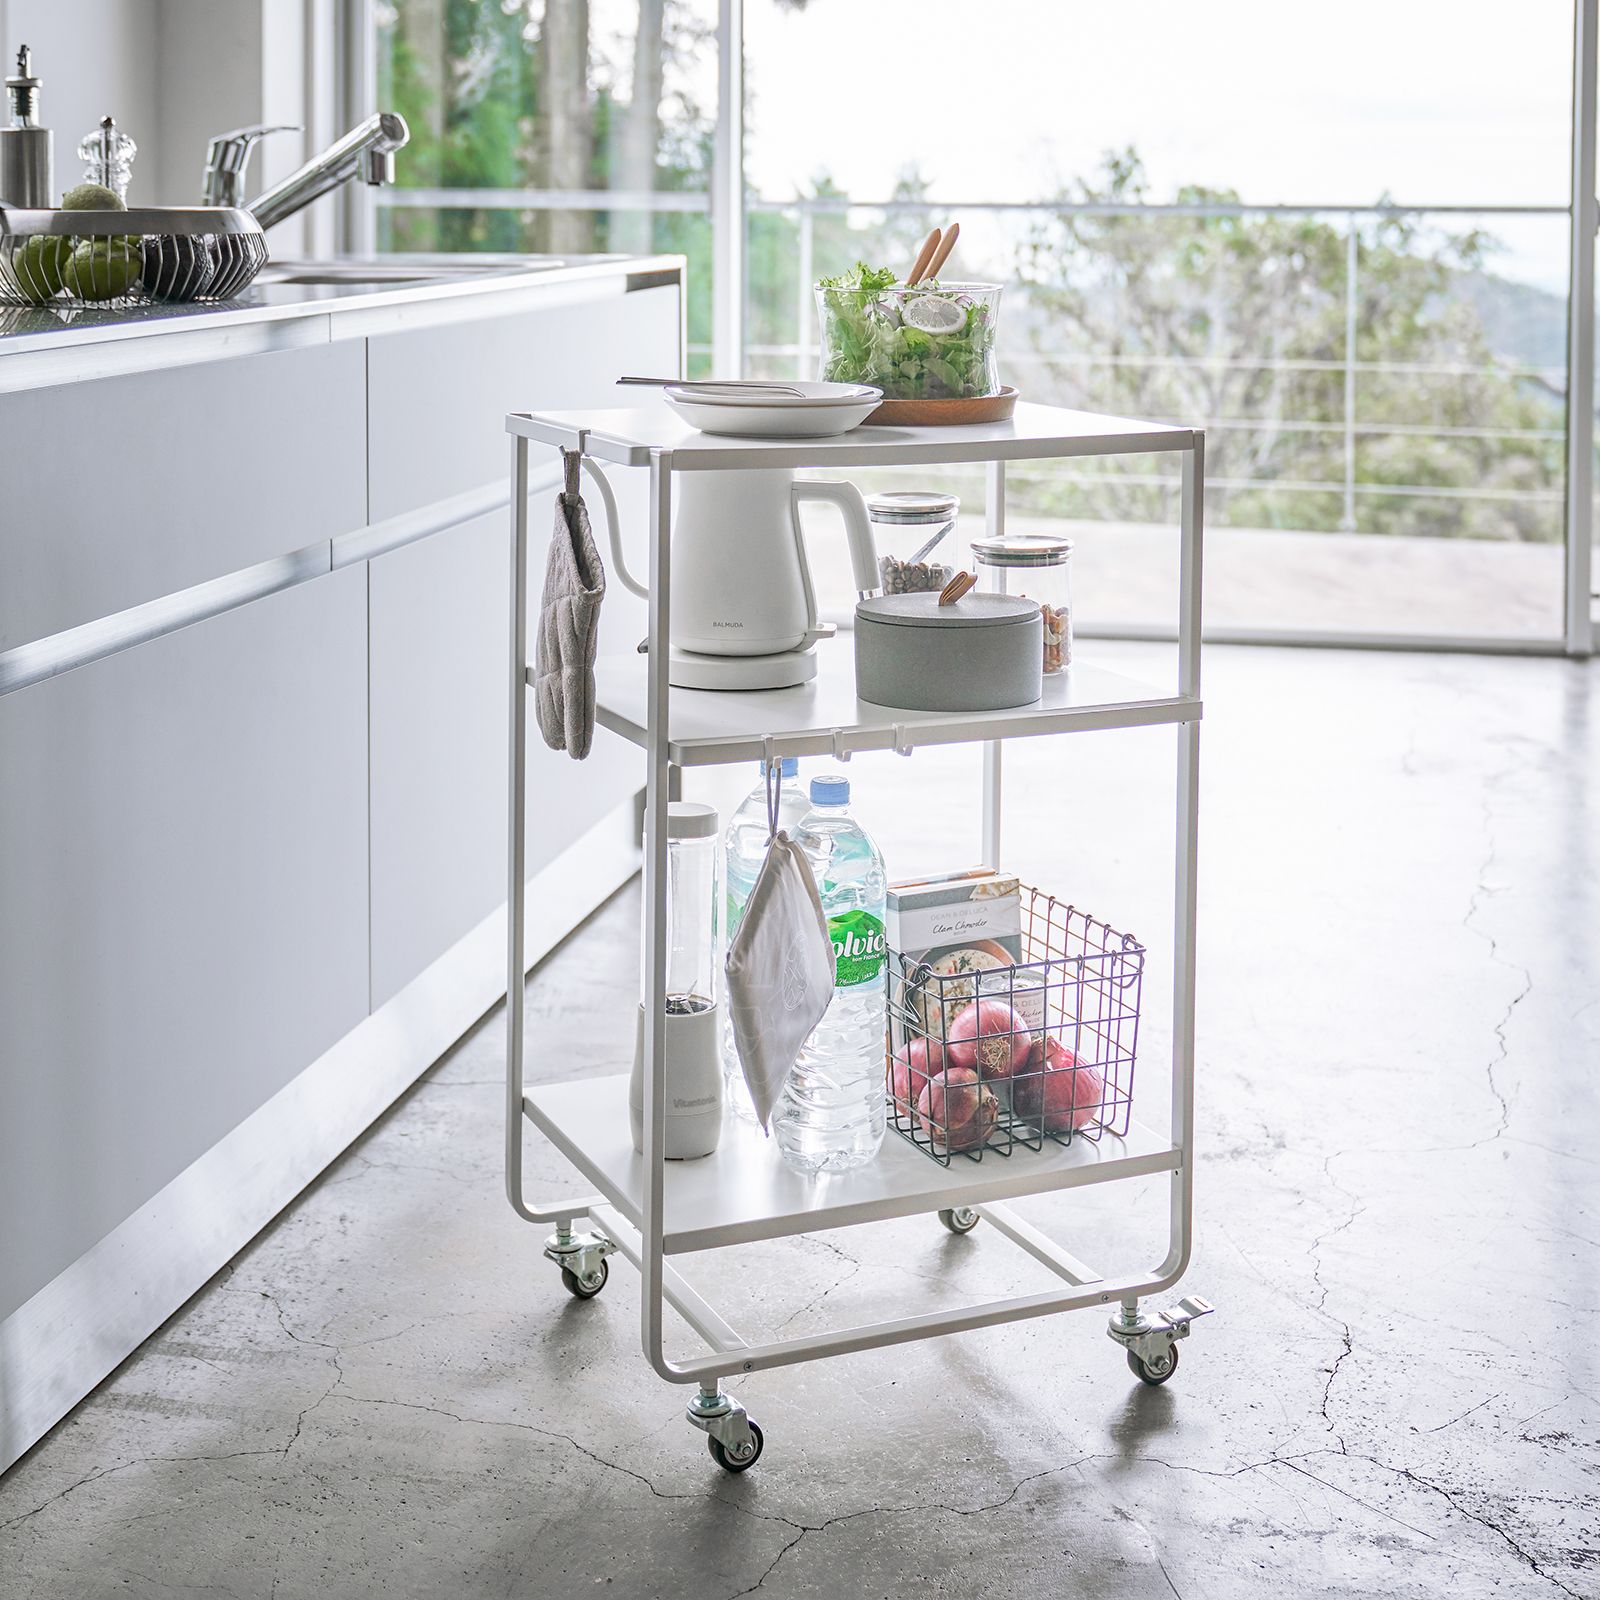 Yamazaki Tower Rolling Utility Cart | The Container Store